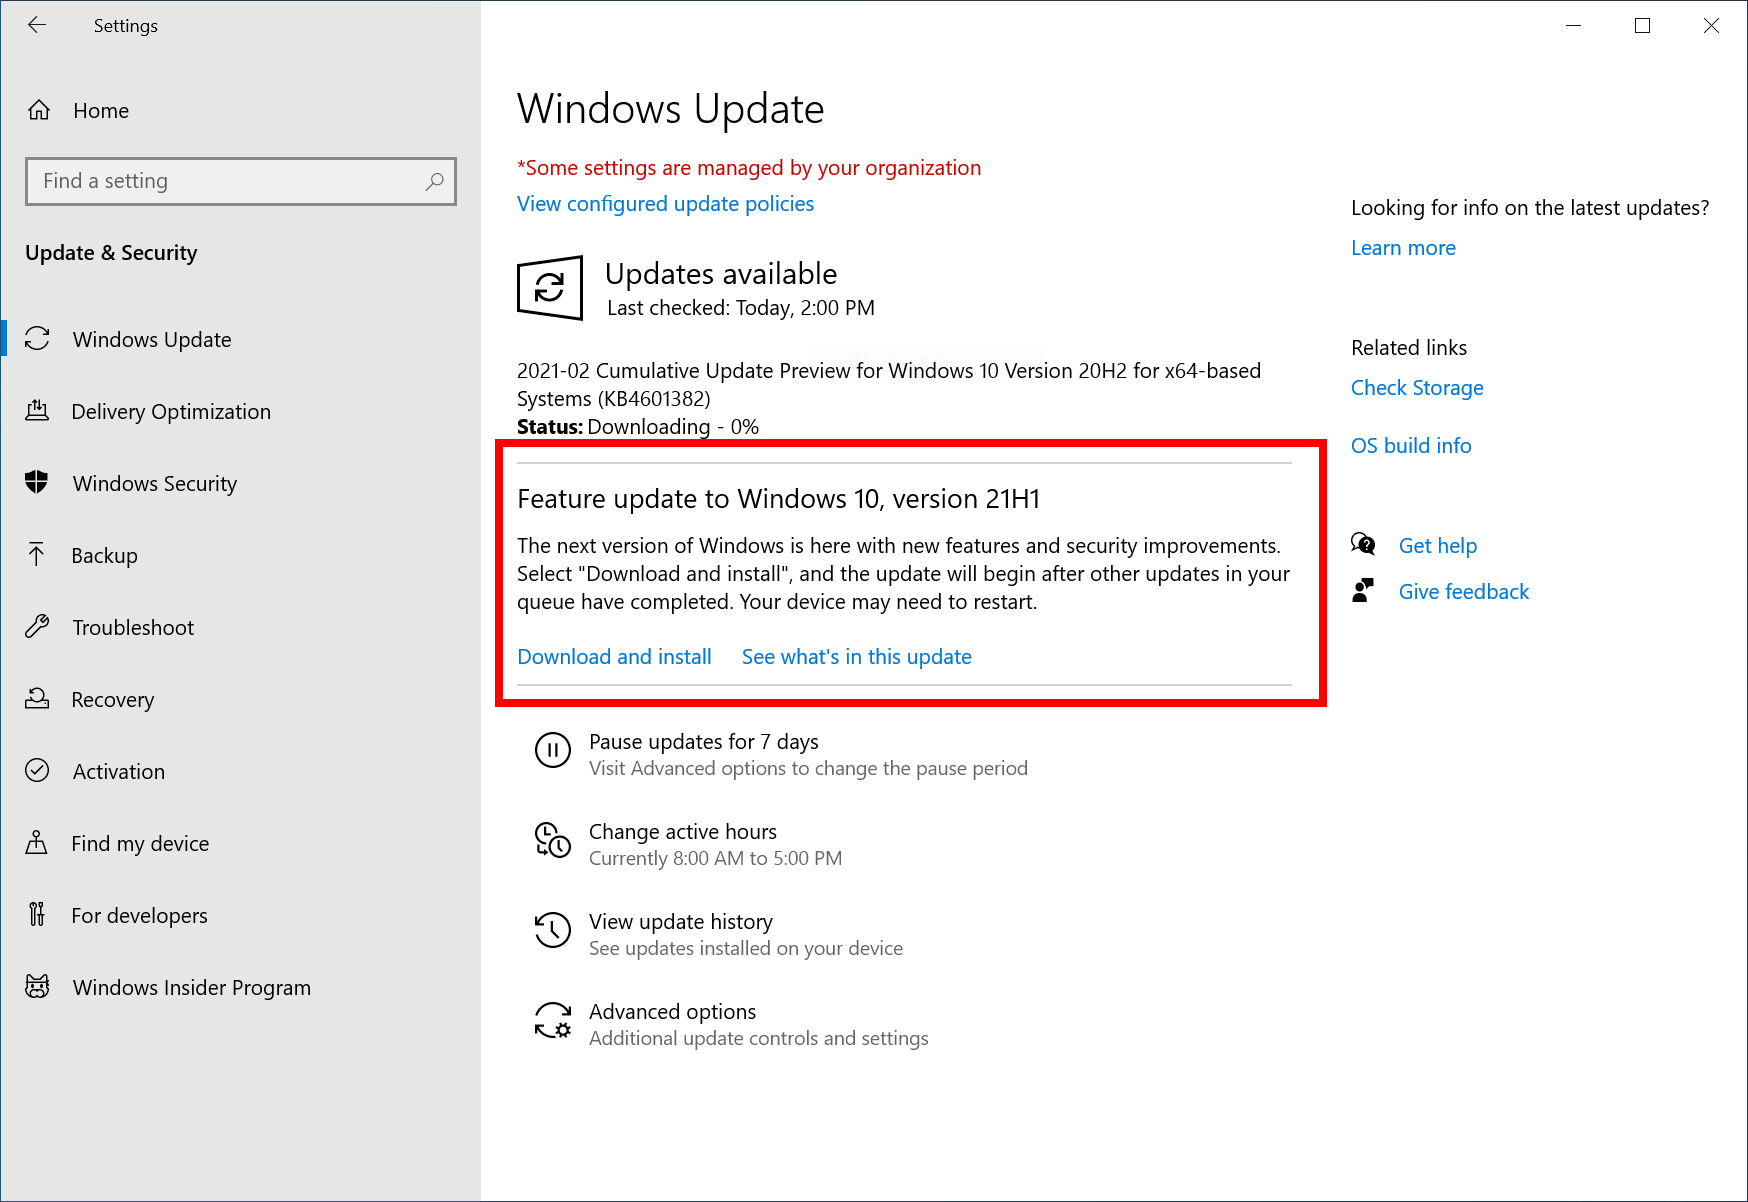 Don't get to excited about the features of Windows 10 version 21H1 windows-10-version-21h1-feature-update.png